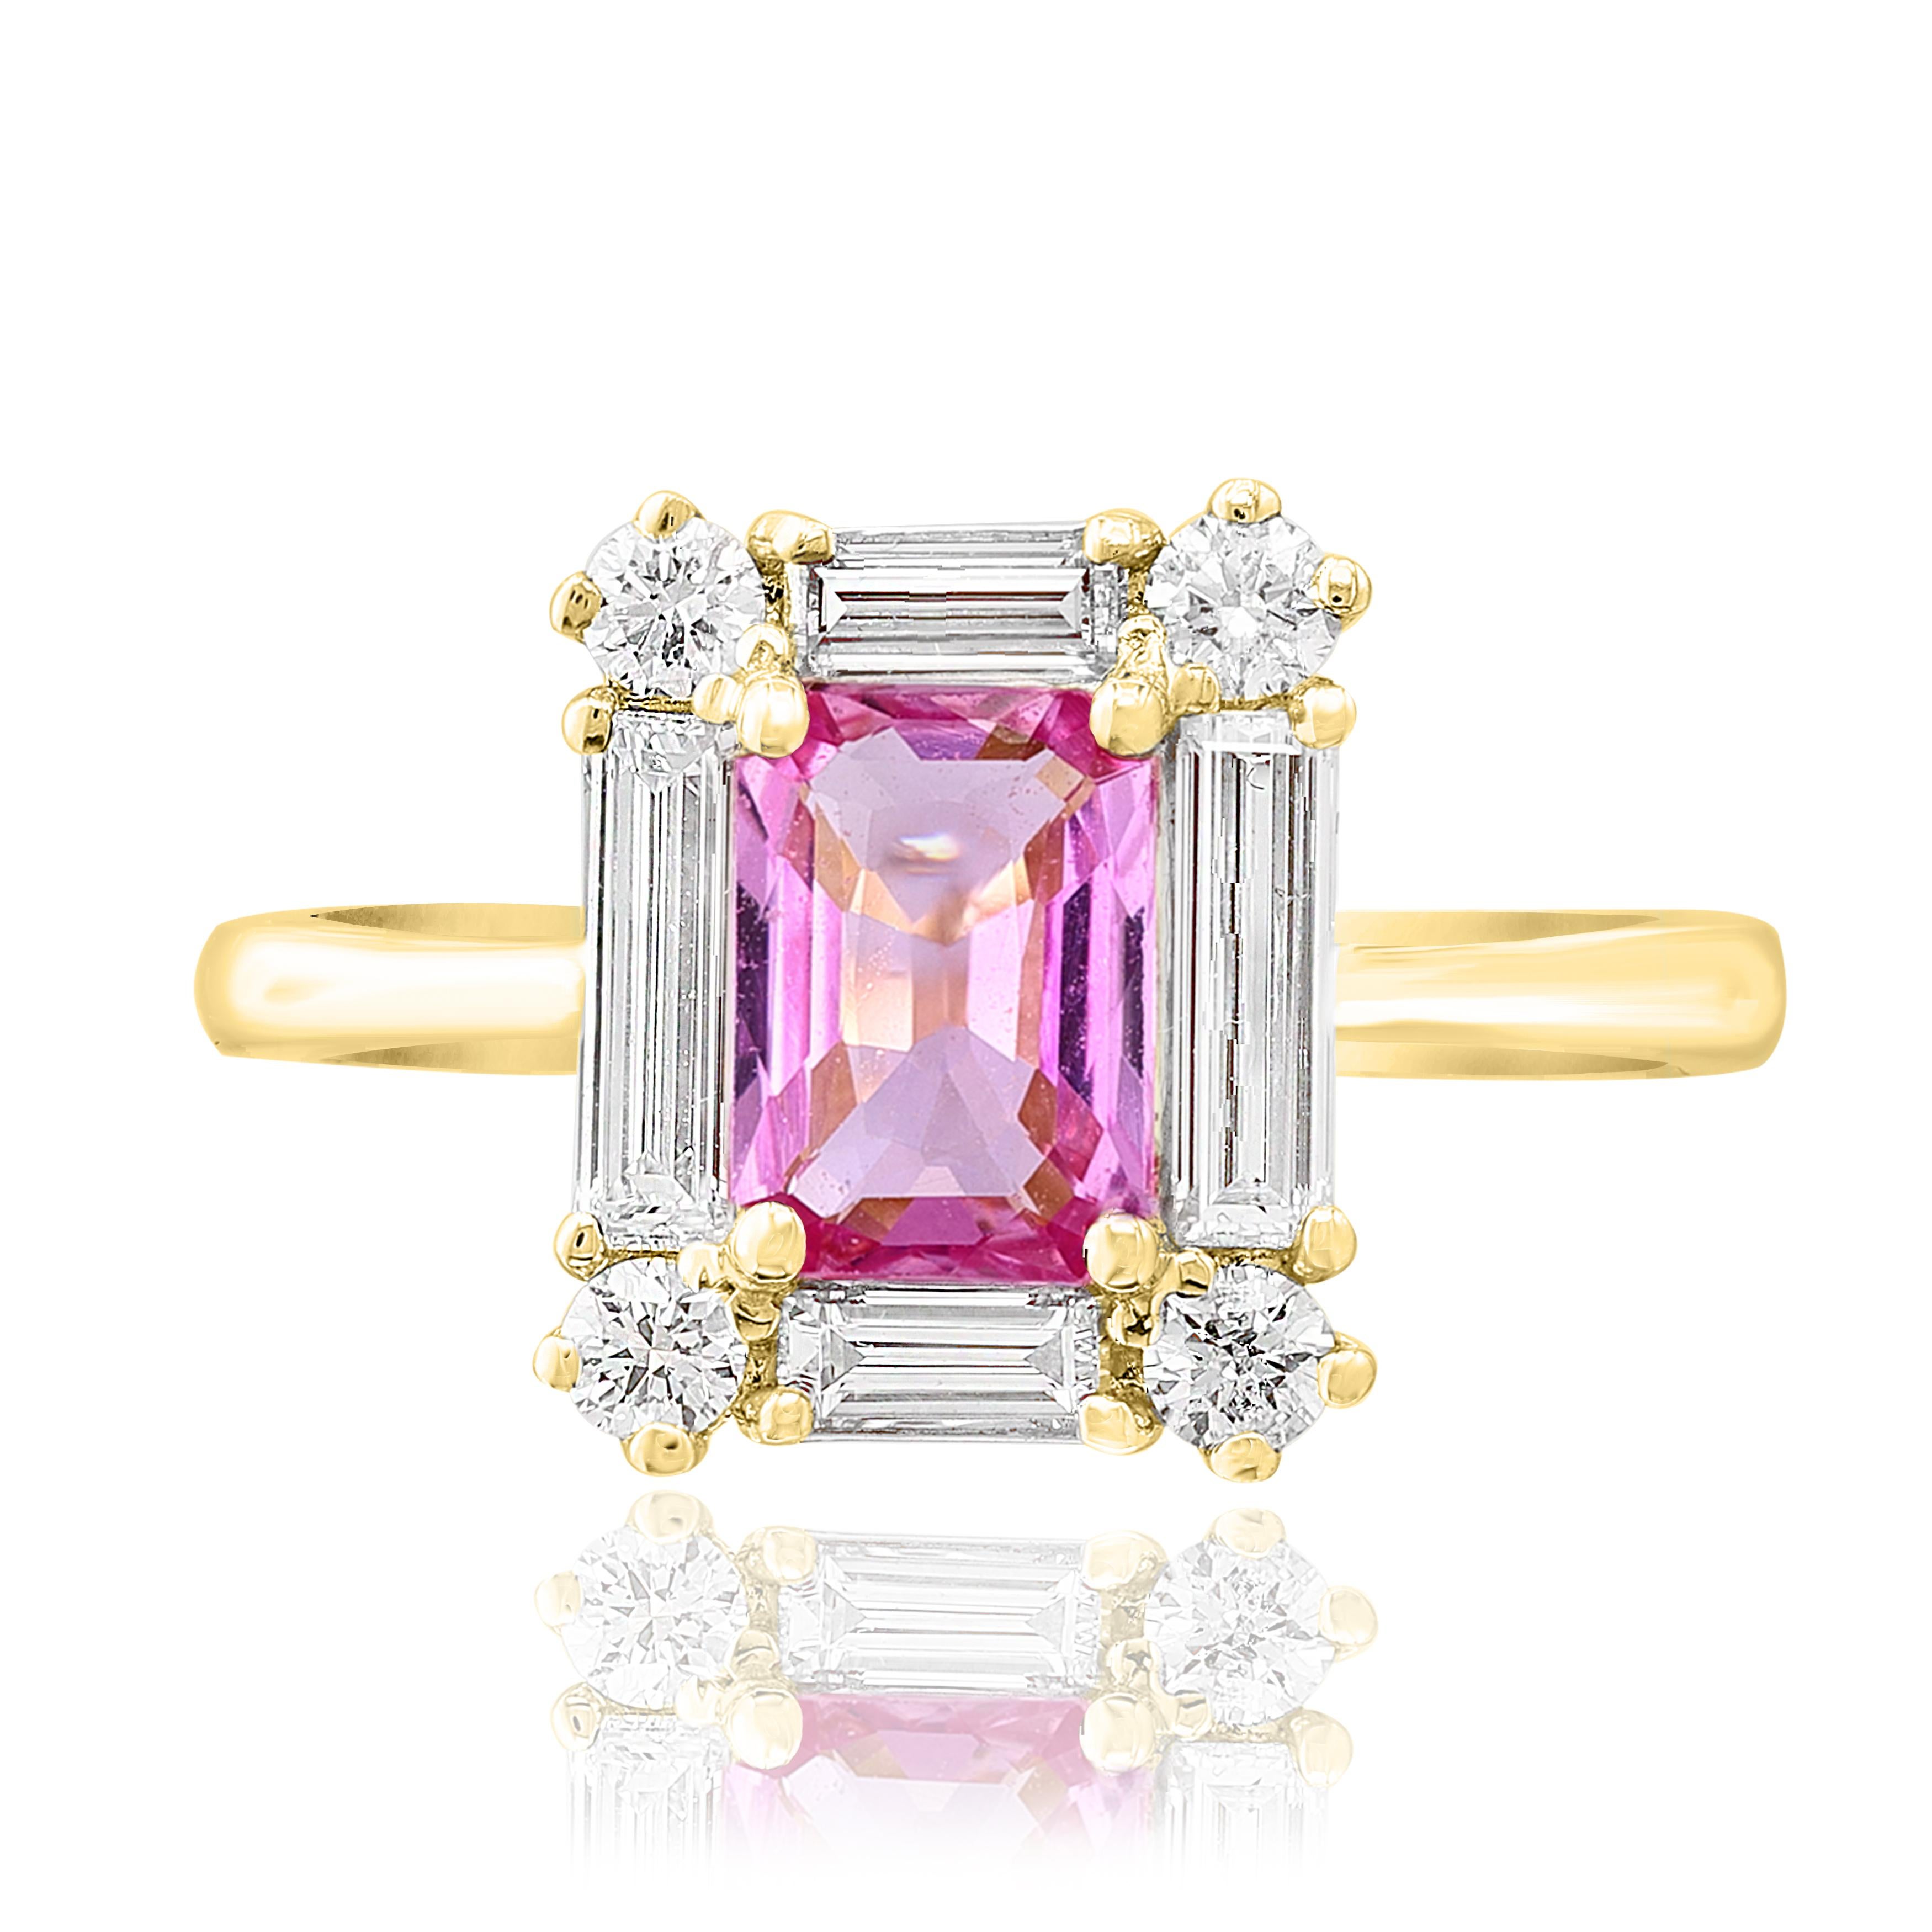 A fashionable ring showcasing a 0.55-carat emerald cut lush pink sapphire. The center stone is surrounded by a row of brilliant-cut round and baguette diamonds weighing 0.35 carats total. Made in 14k yellow gold. 

Style available in different price